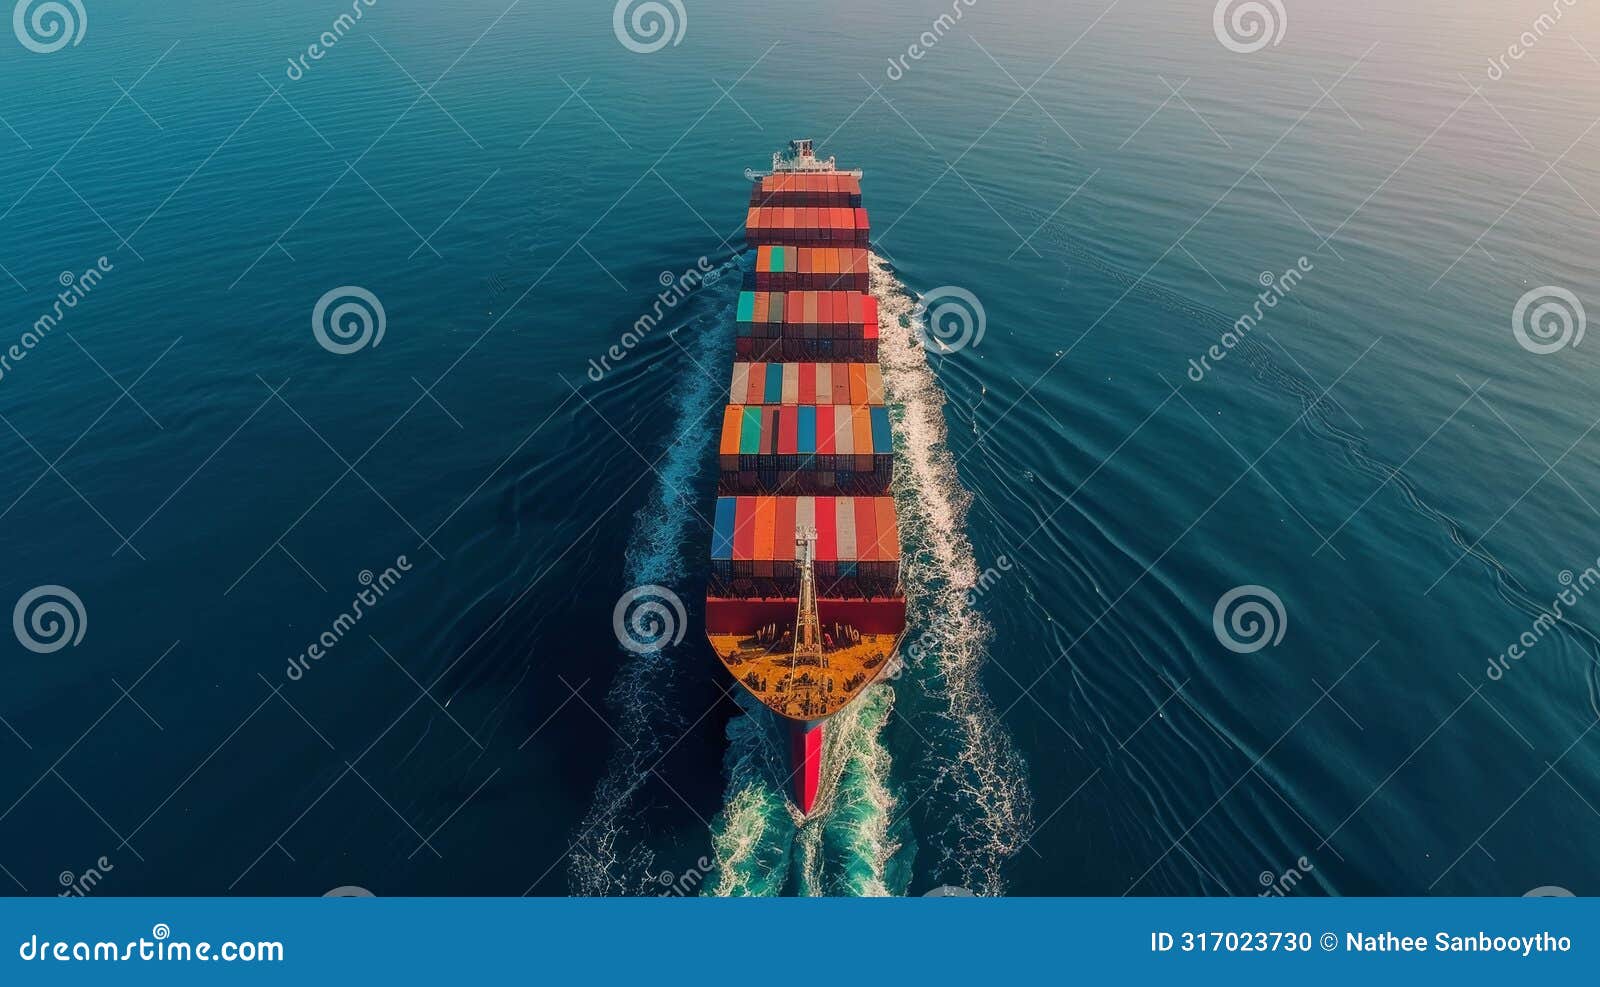 aerial view of a fully laden cargo ship at sea